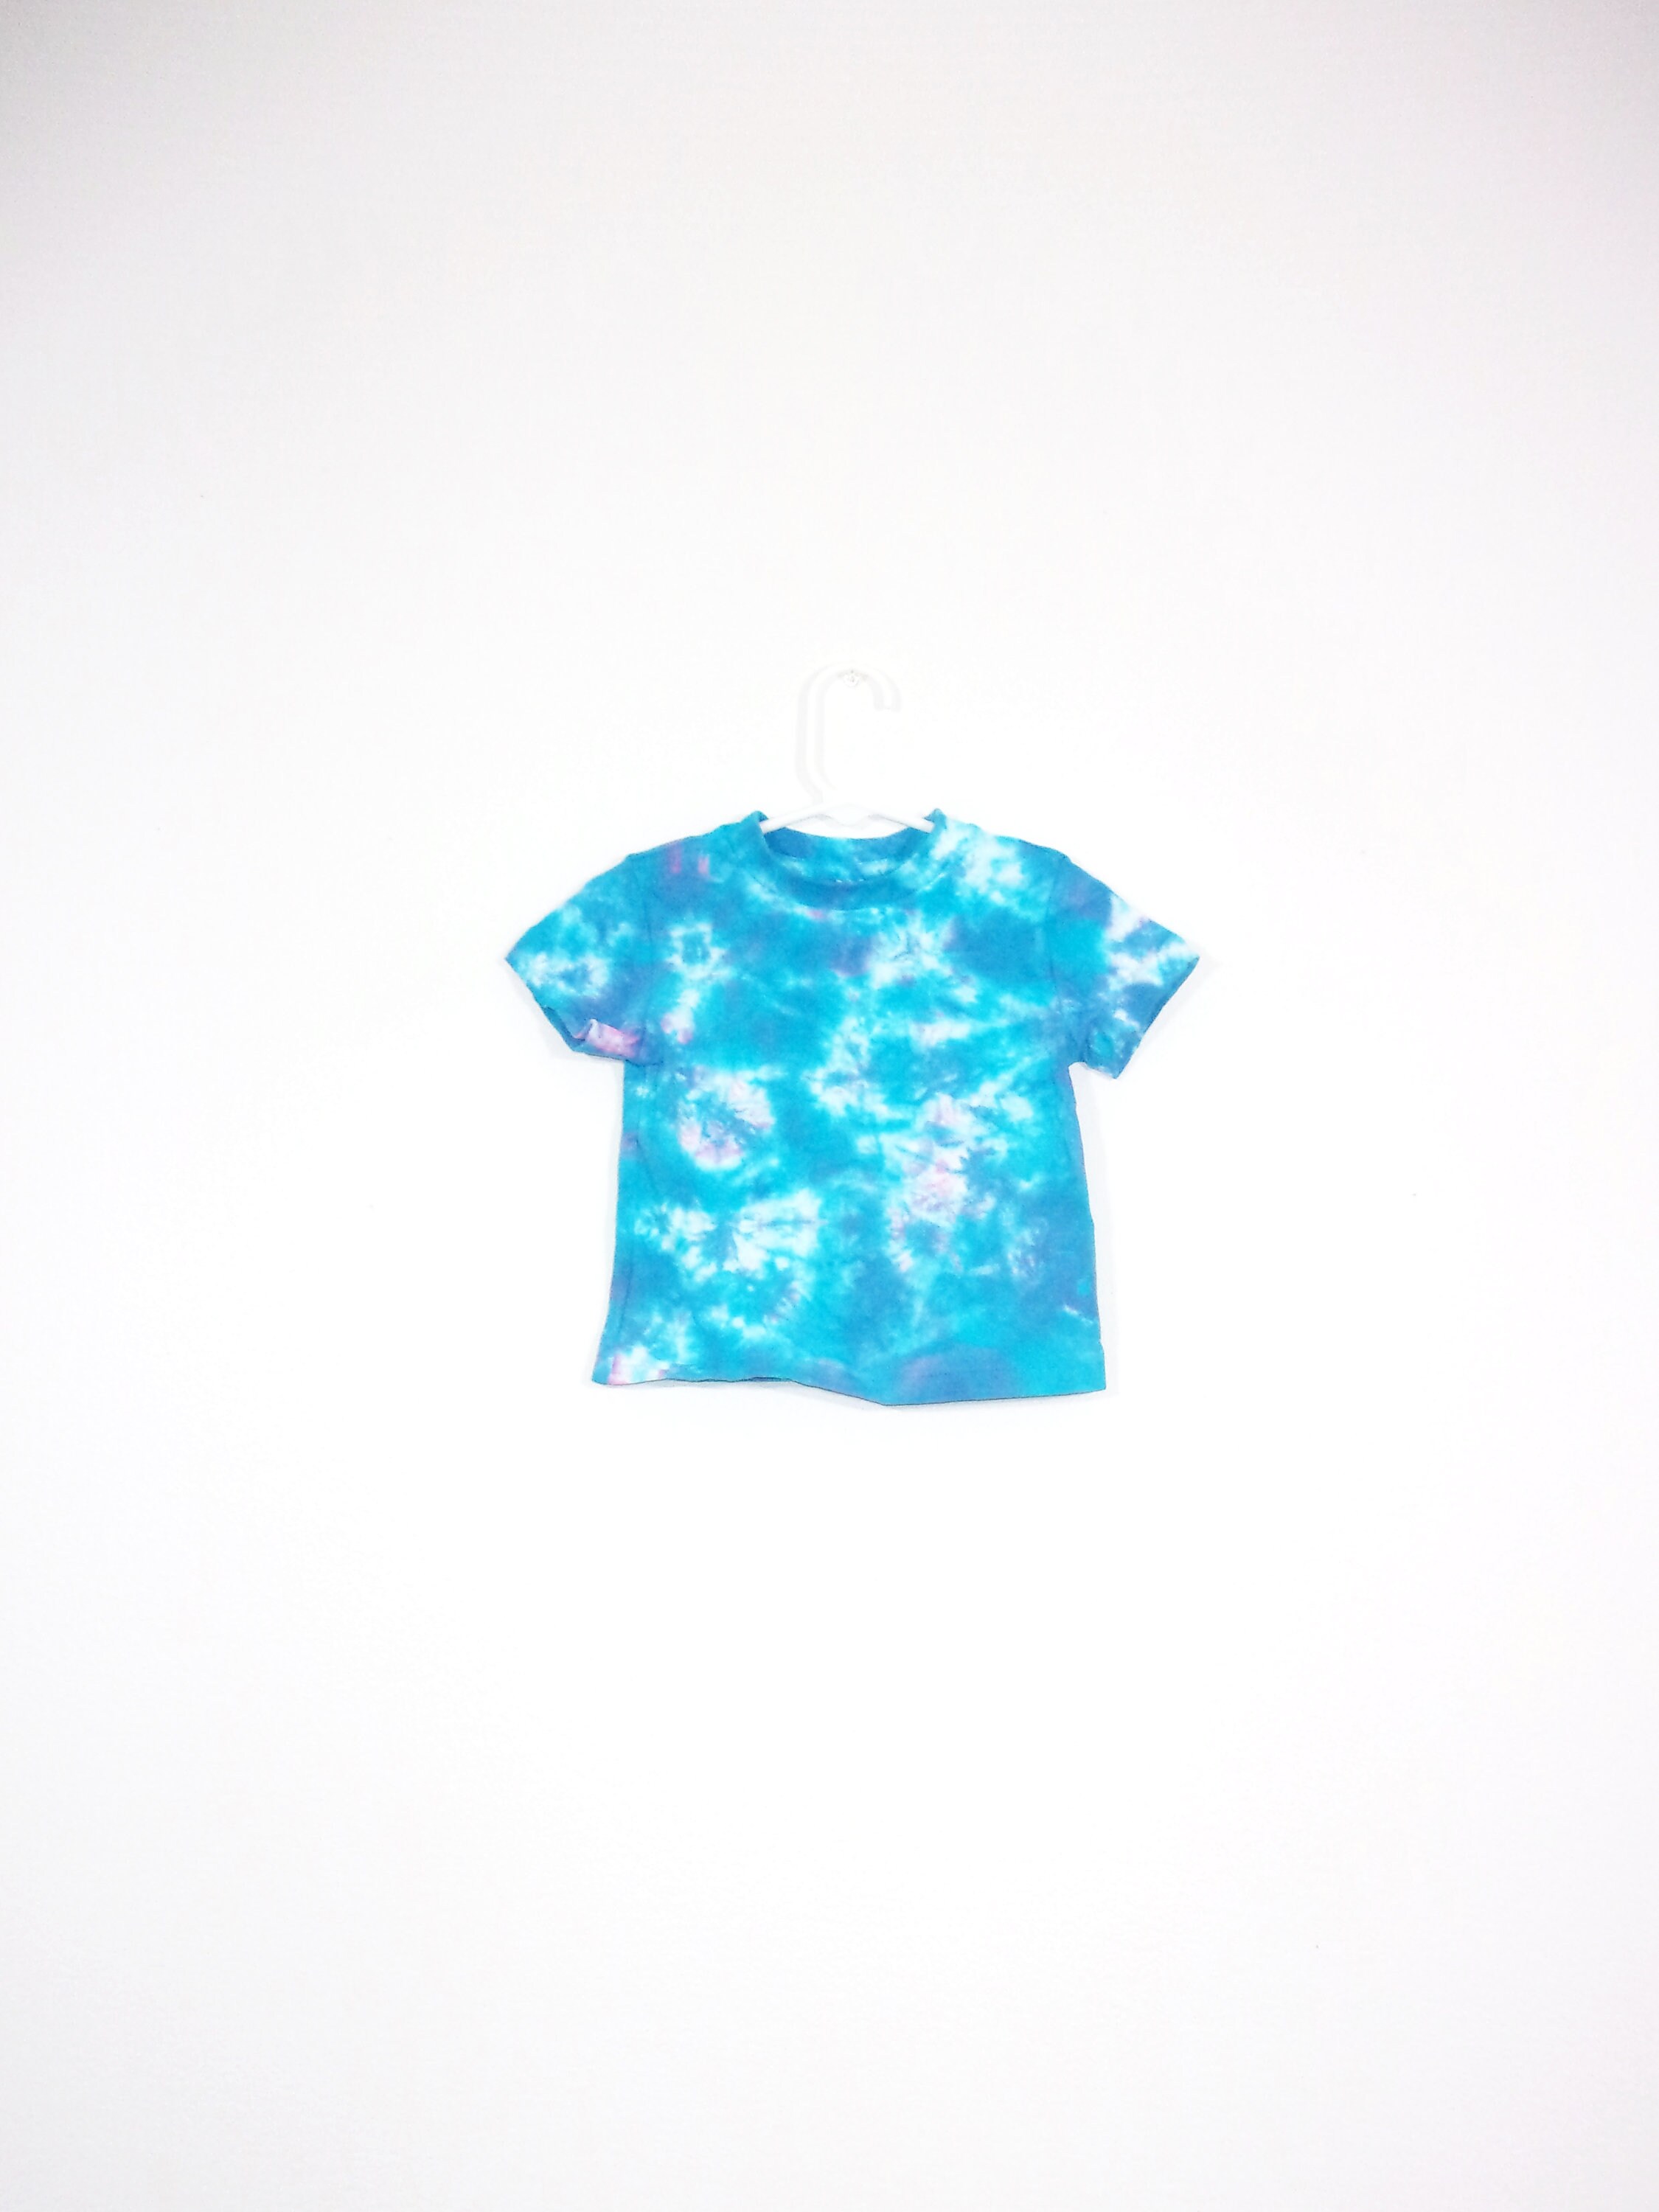 Tie Dye T-Shirts Small Youth Crinkle Cotton Short Sleeve Premade